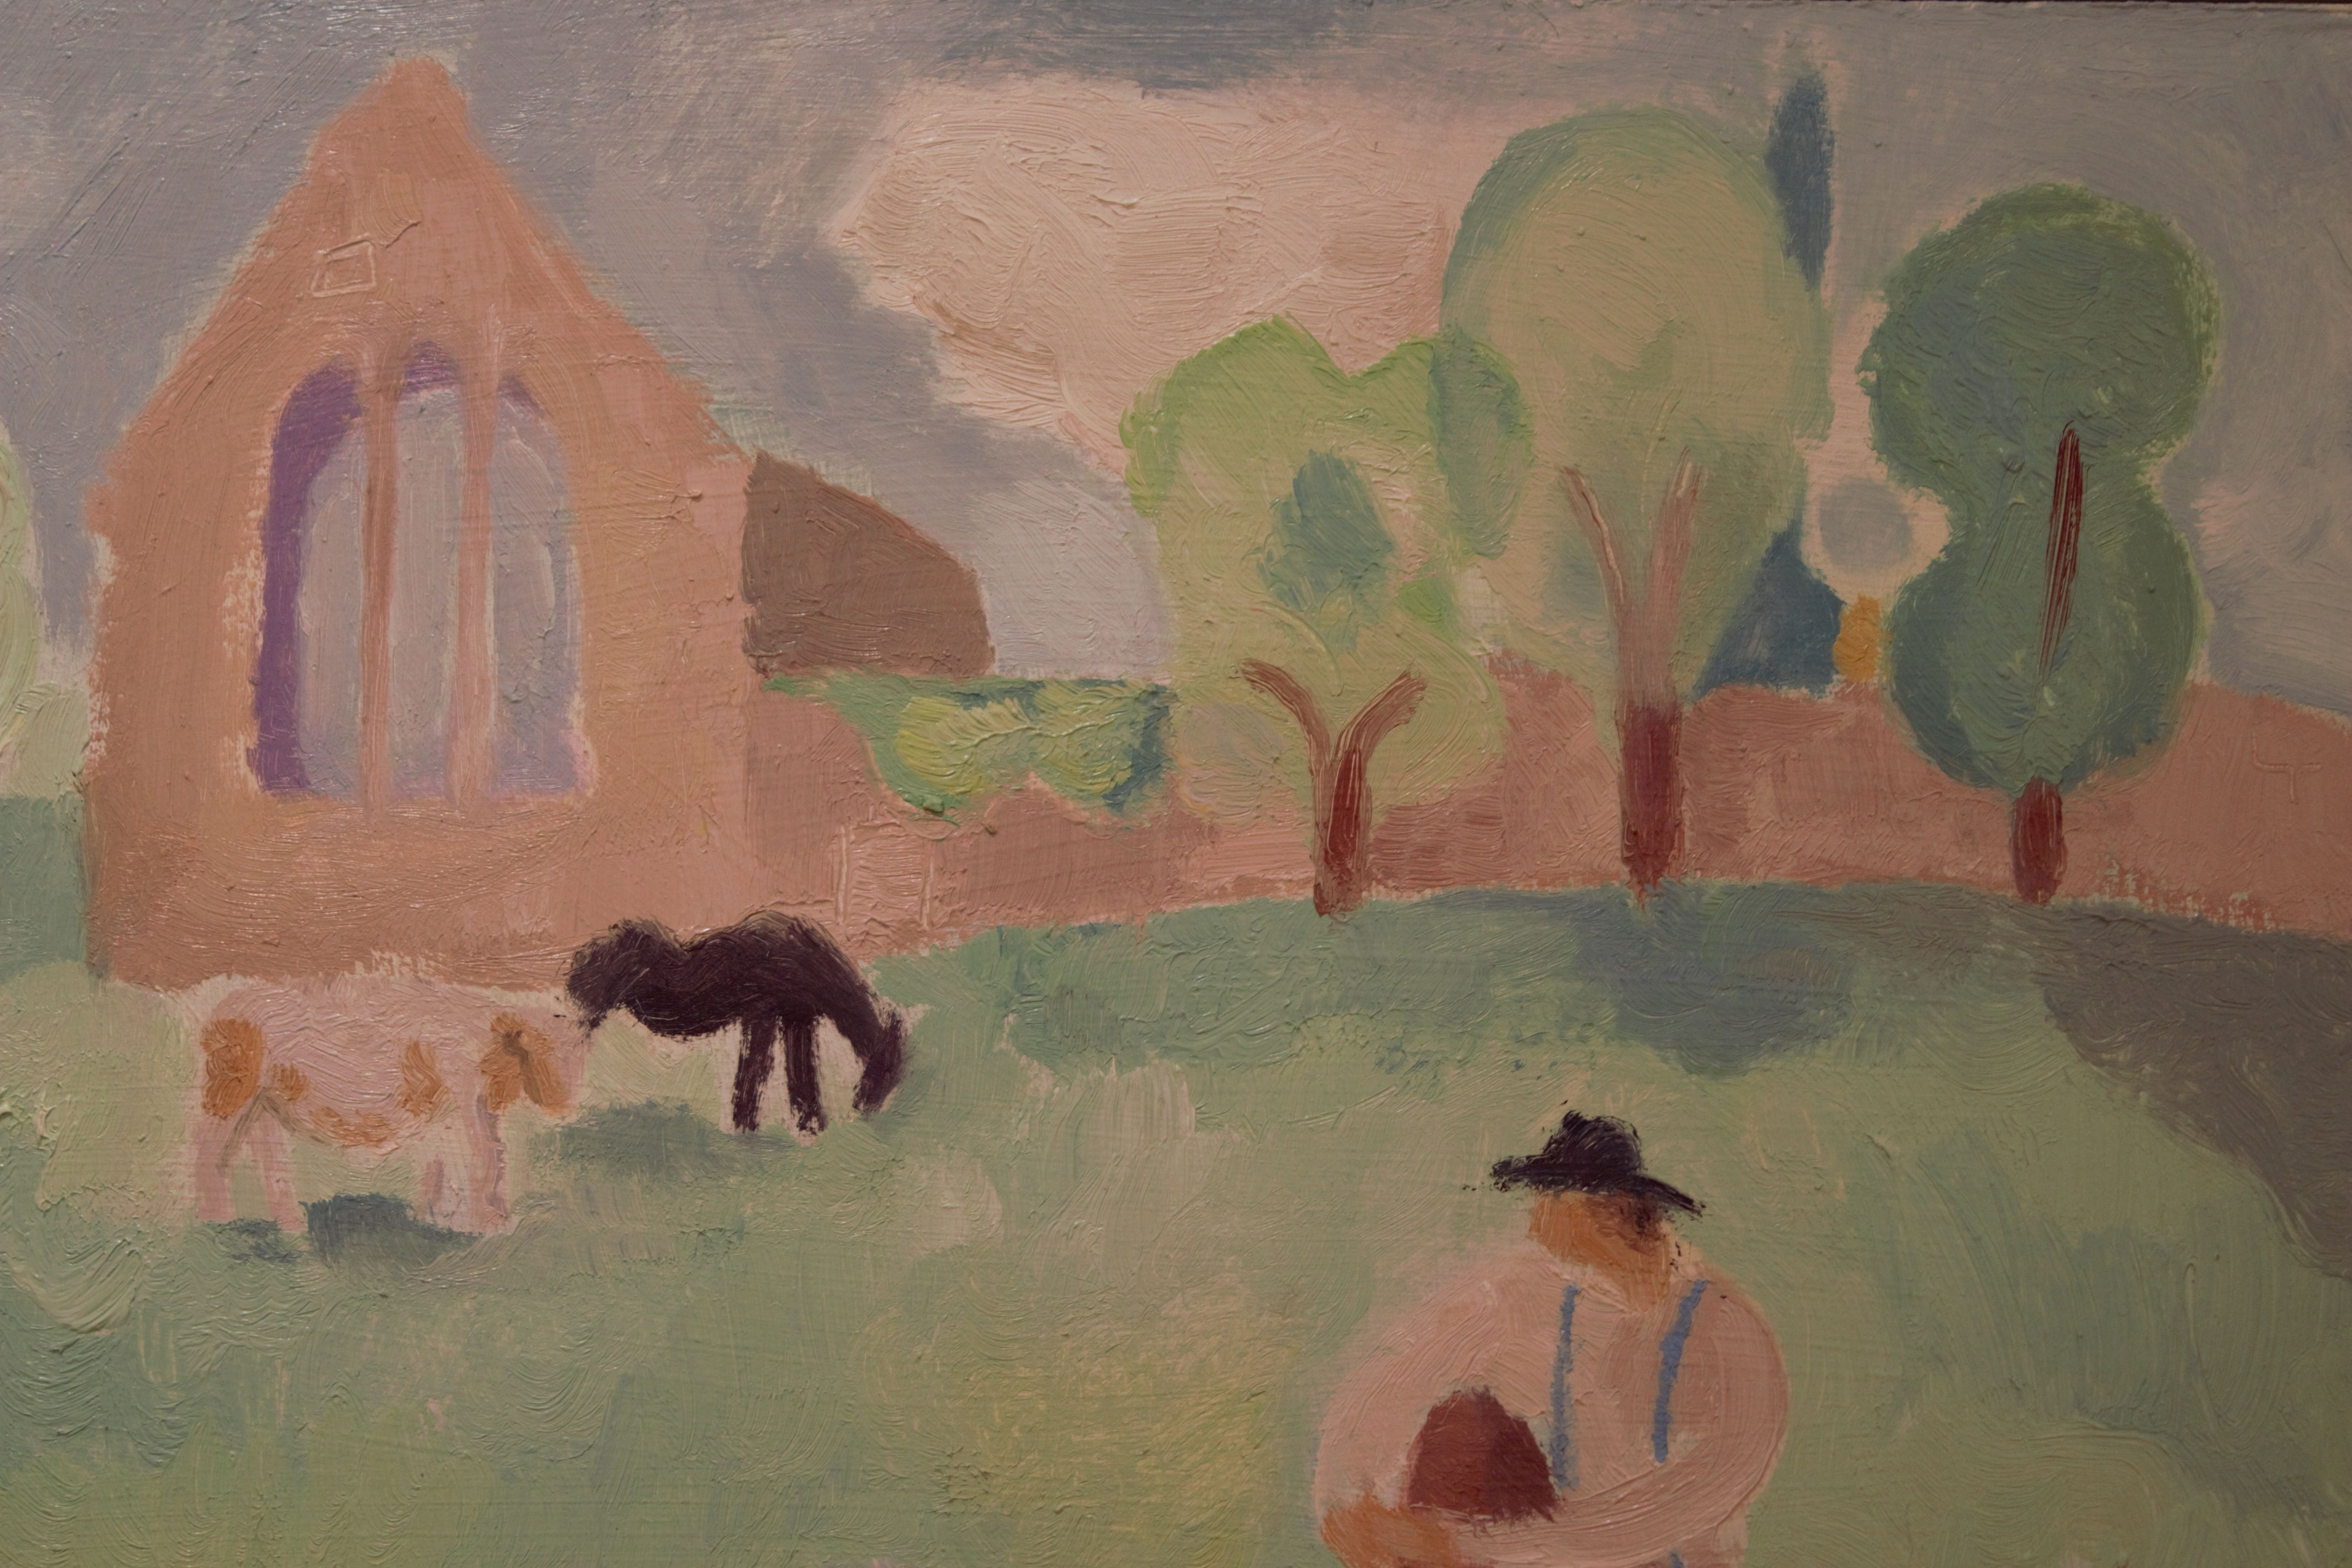 'The Ruin' by Gabriella Bailey. A figure and two horses sit on the grass in front of a church ruin.